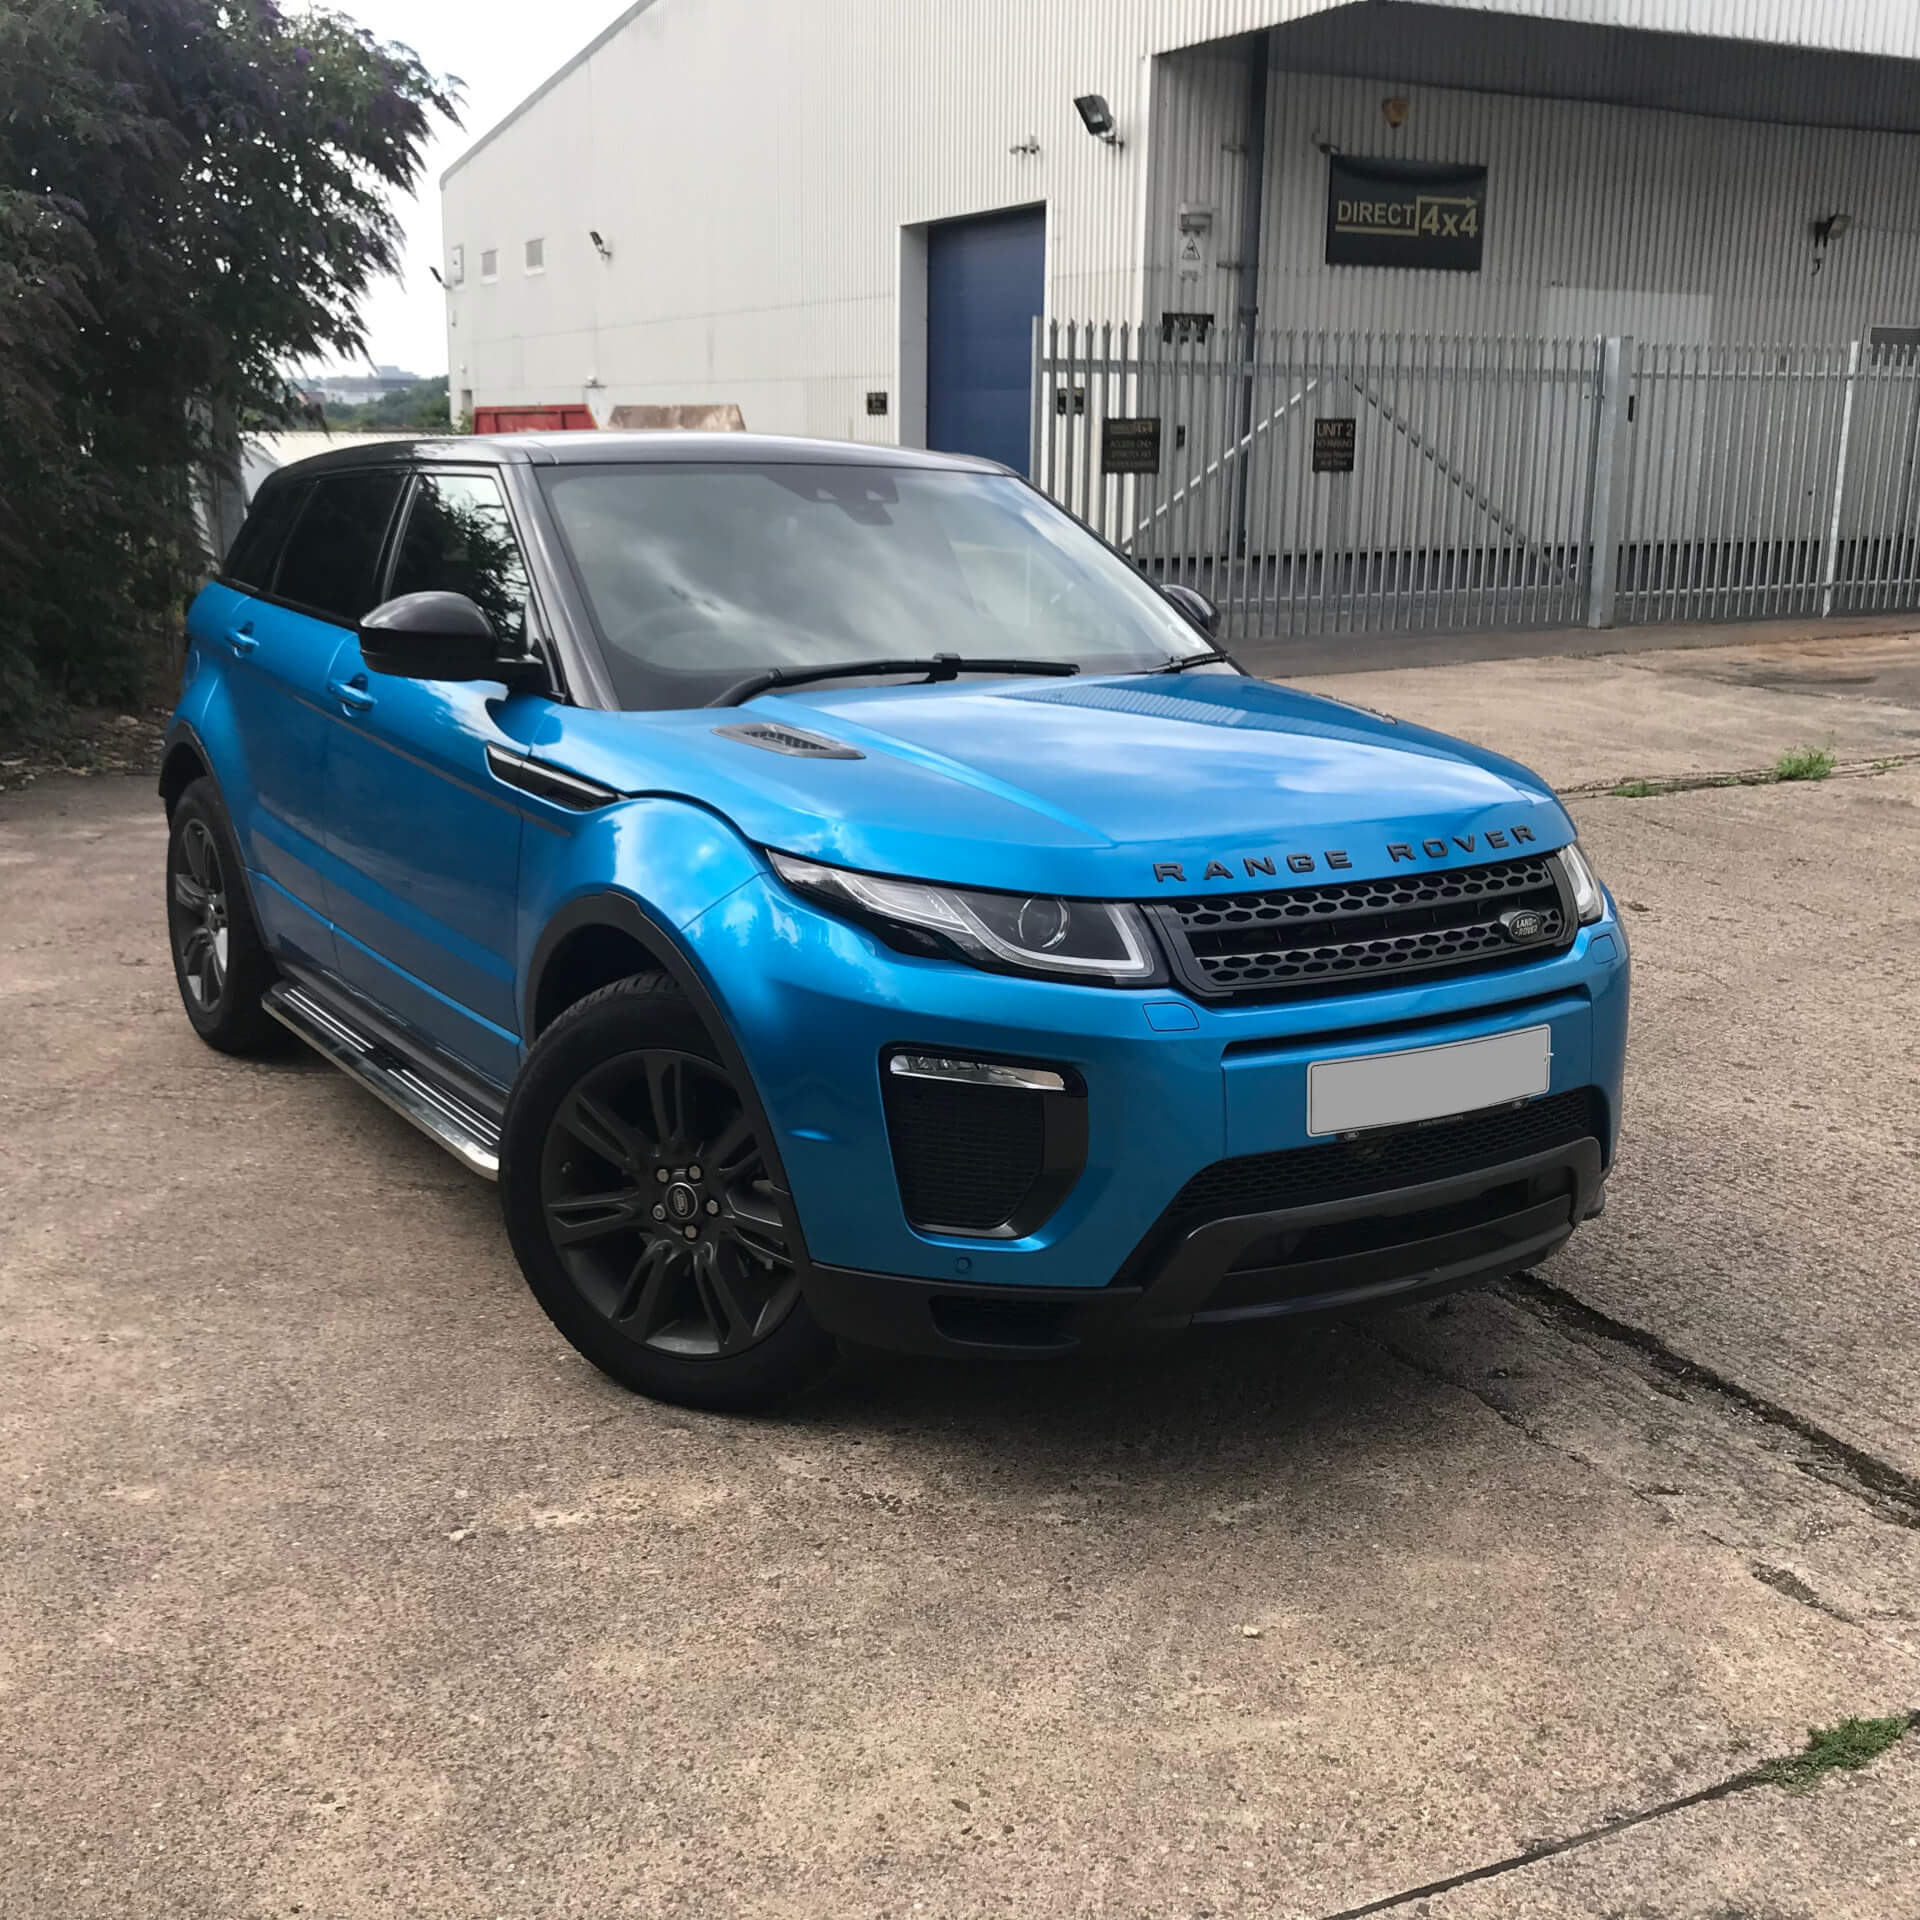 Direct4x4 accessories for Range Rover Evoque vehicles with a photo of a bright blue Range Rover Evoque outside our offices fitted with premier side steps